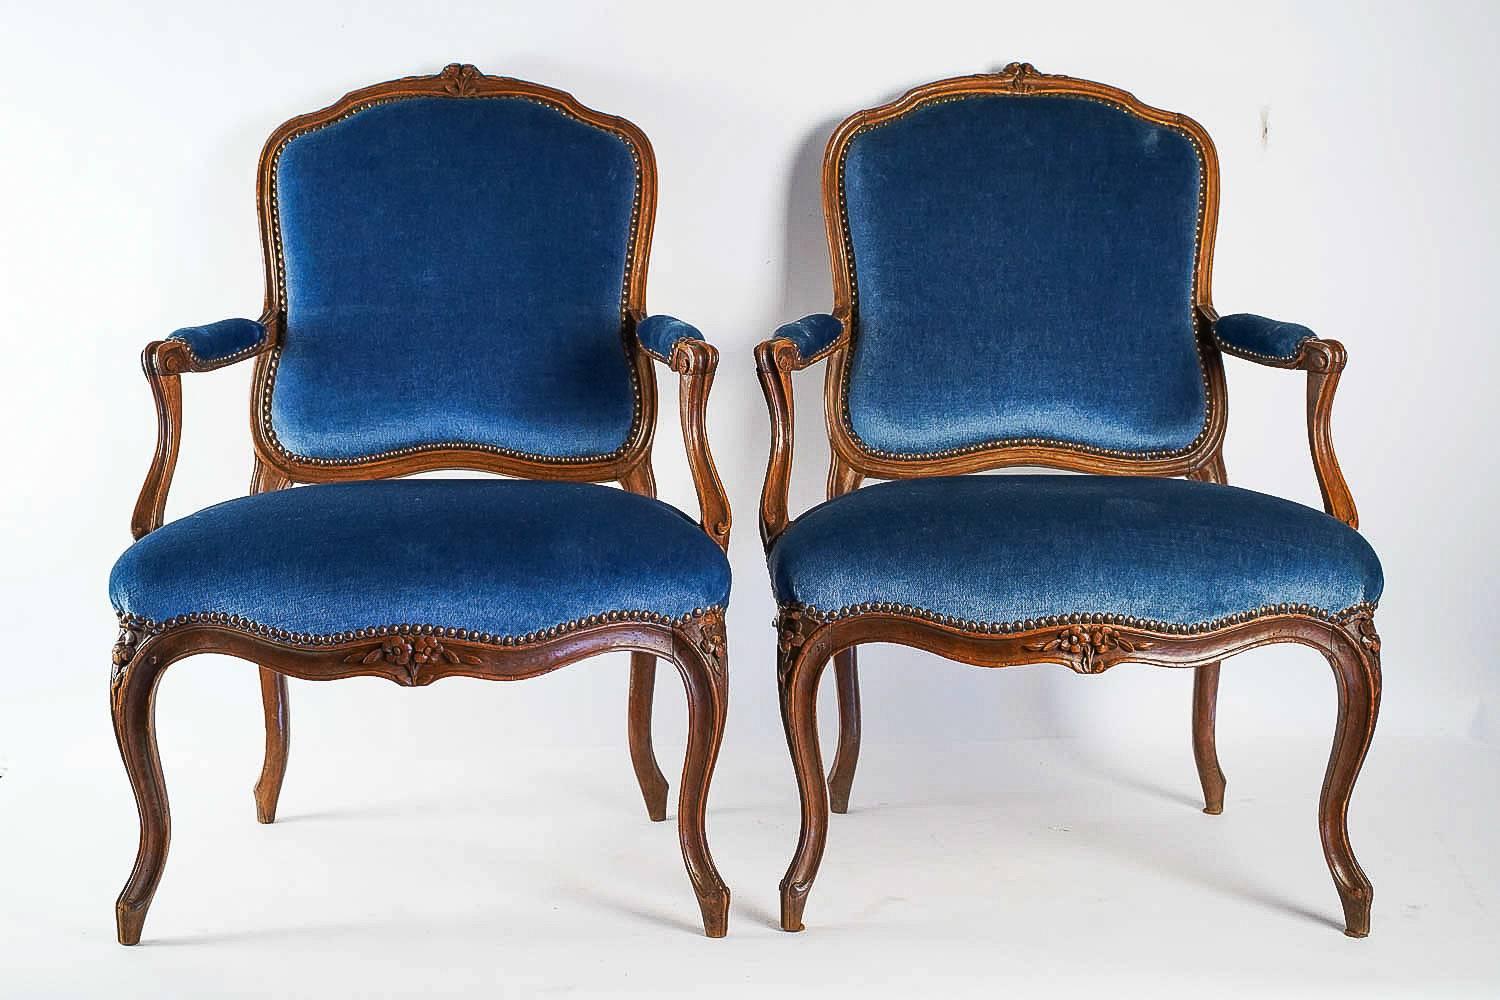 French Stamped by Louis Delanois, Set of Six Louis XV Period Large Armchairs circa 1765